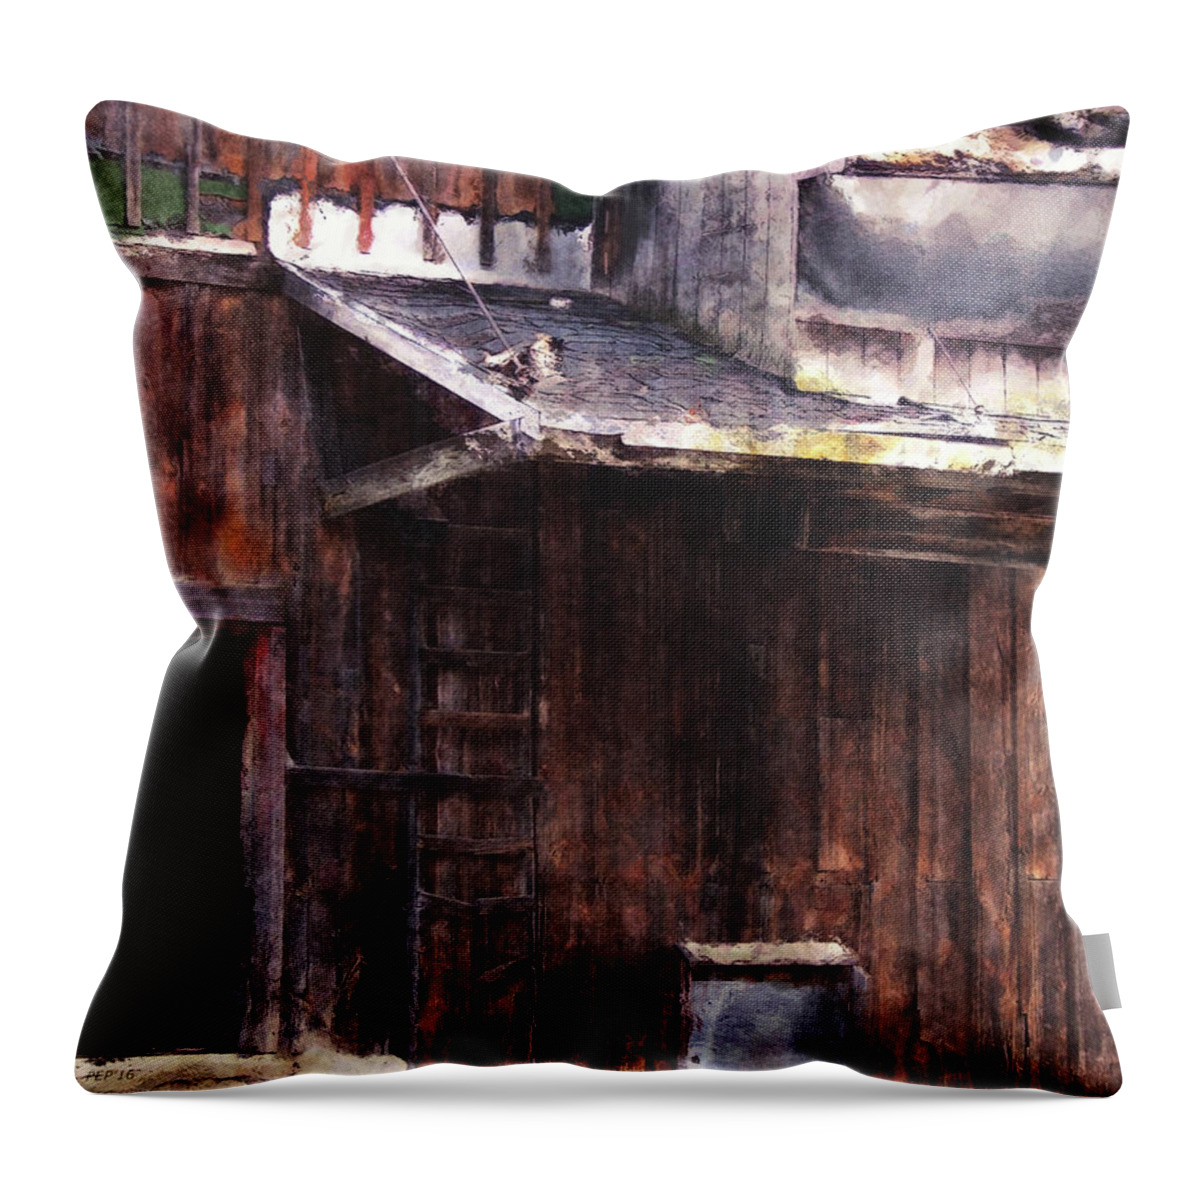 Photography Throw Pillow featuring the photograph Weathered Old Building by Phil Perkins